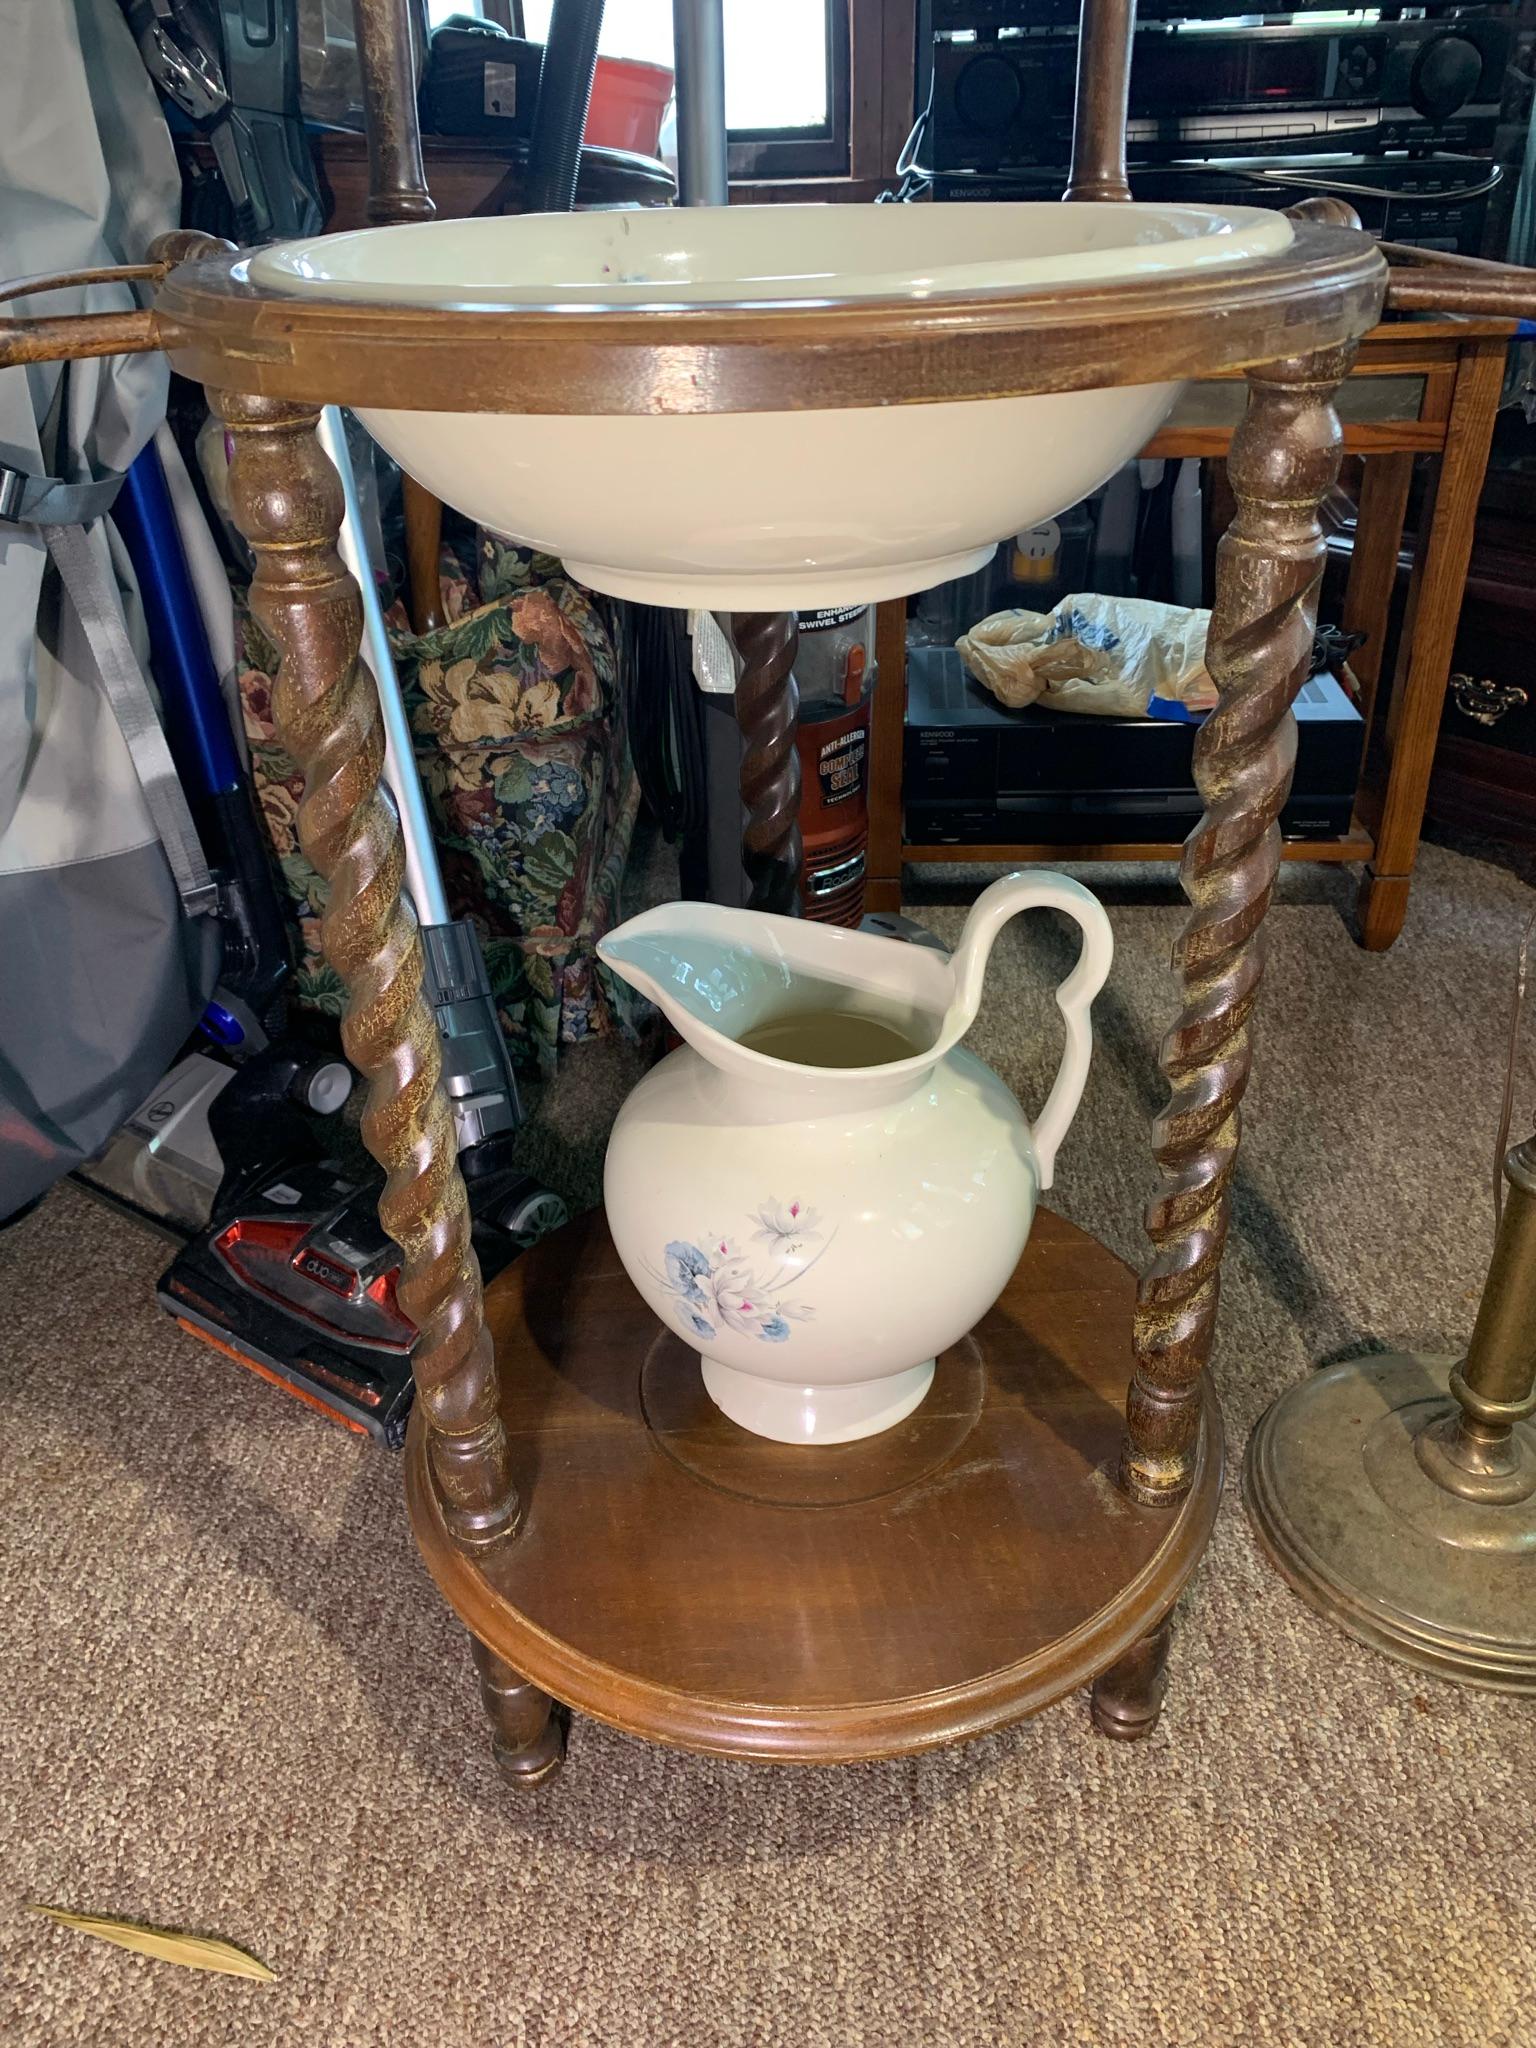 Antique Washstand with pitcher, Bowl & Floor Lamp